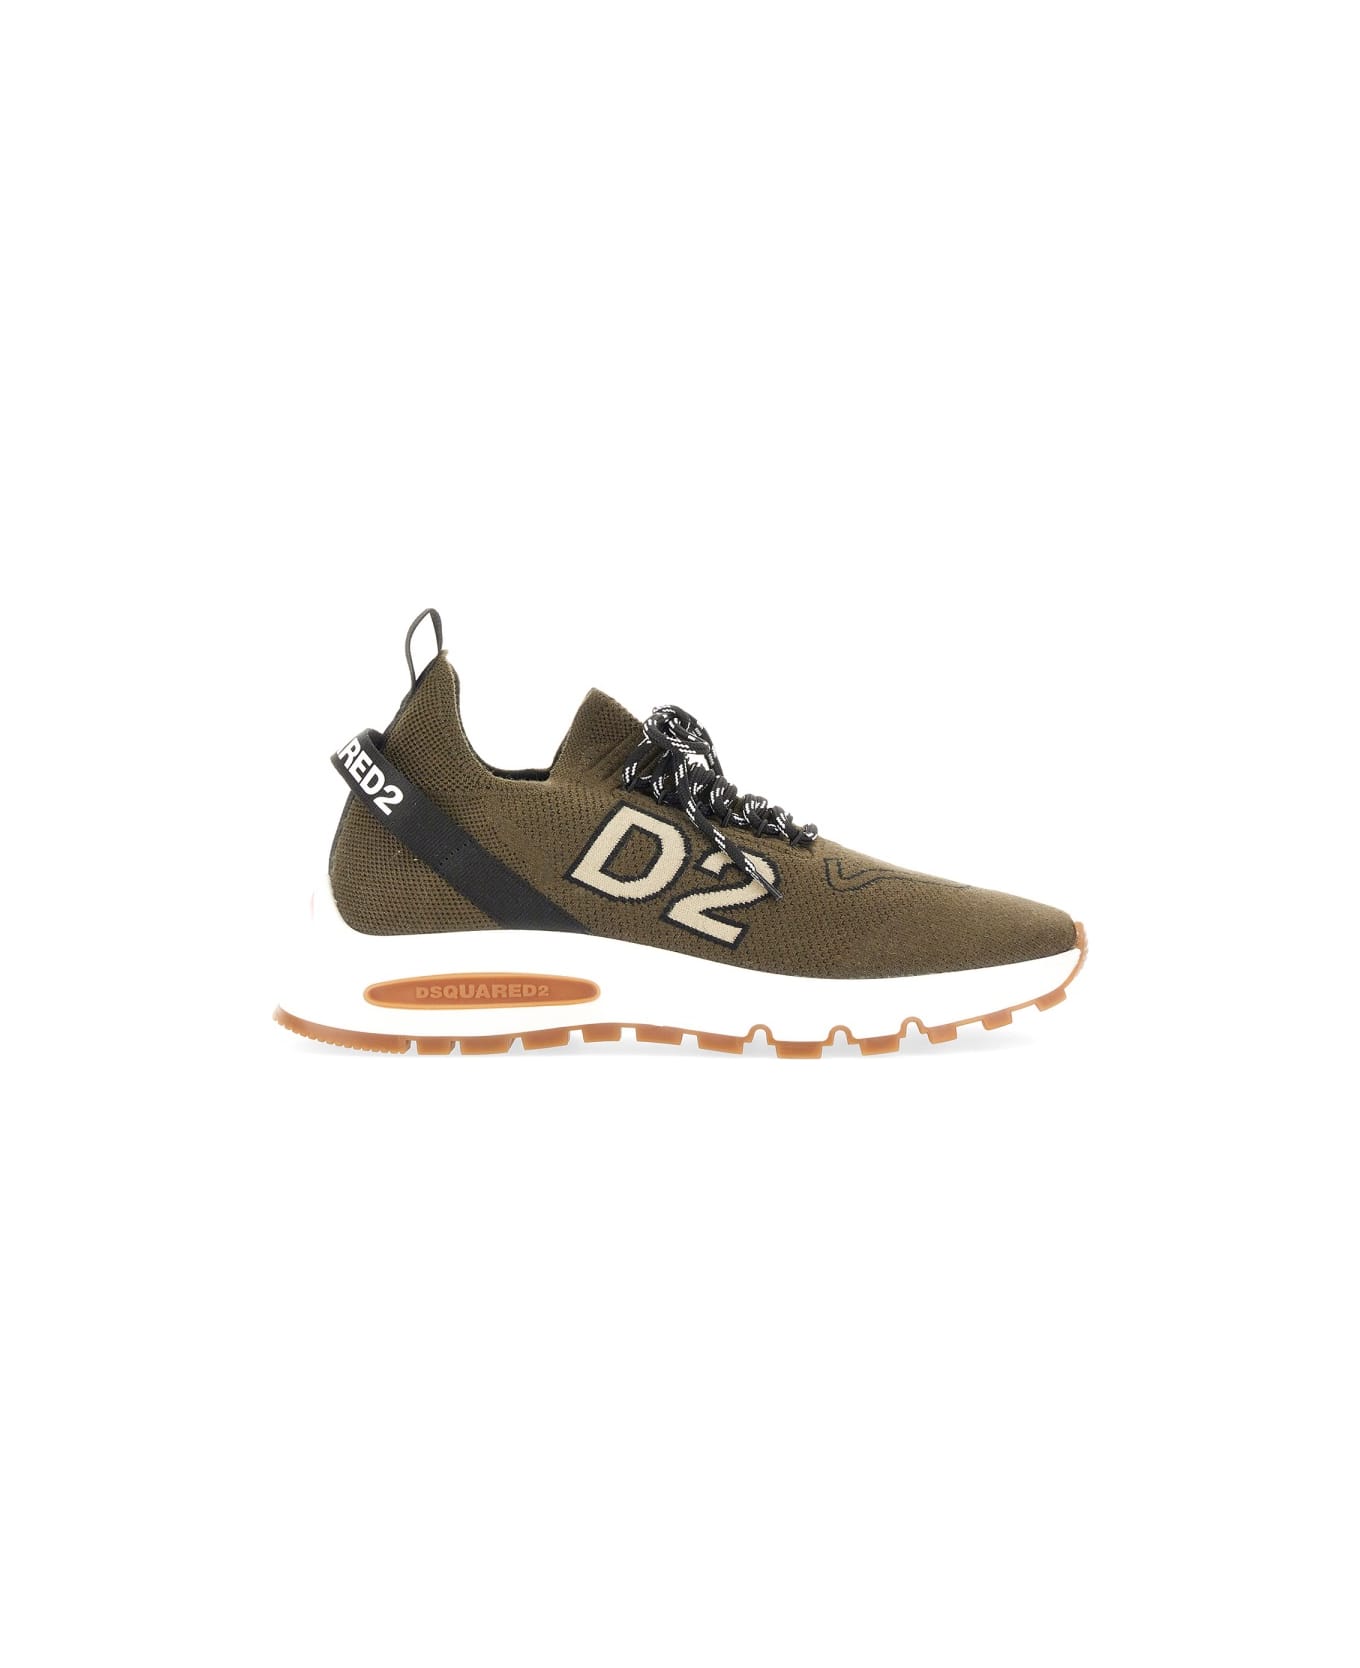 Dsquared2 Sneaker Run Ds2 - MILITARY GREEN